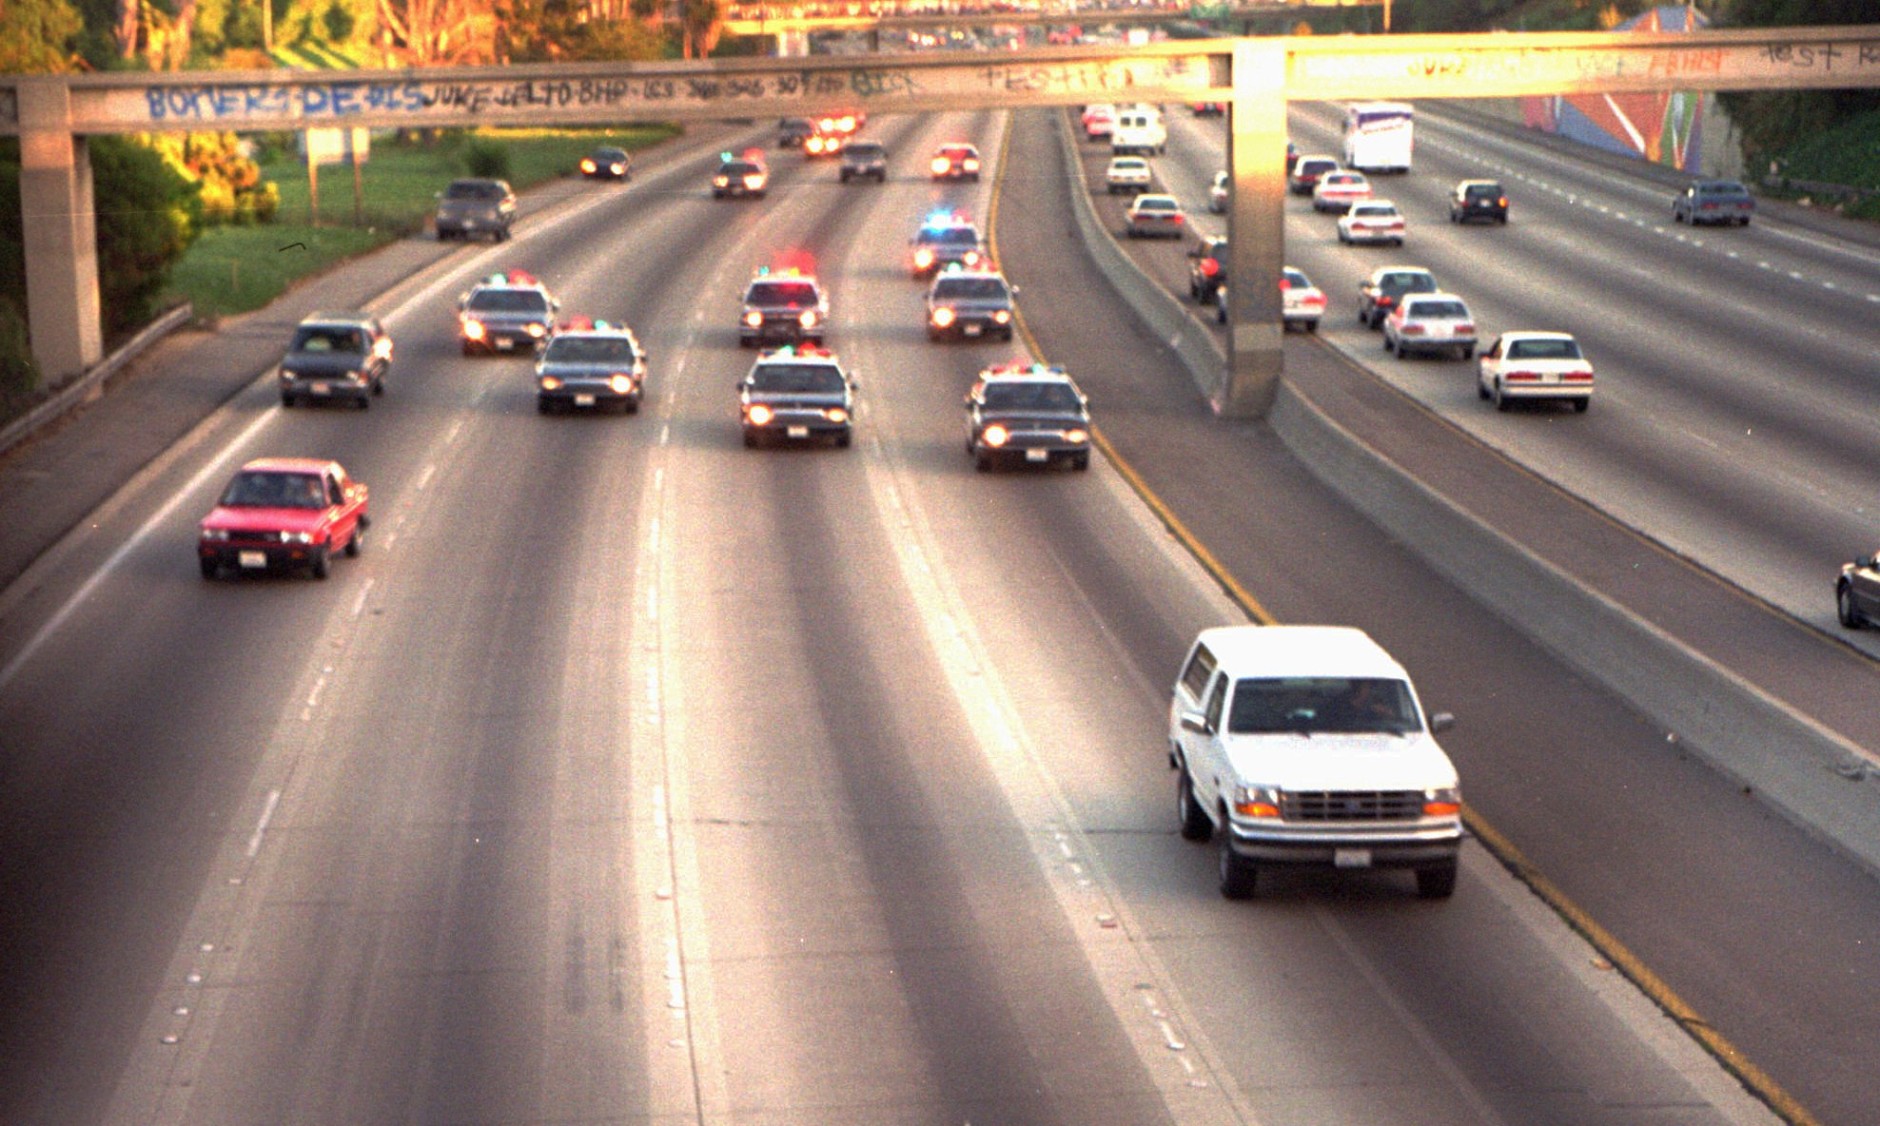 A white Ford Bronco, driven by Al Cowlings and carrying O.J. Simpson, is trailed by police cars as it travels on a southern California freeway on June 17, 1994, in Los Angeles.  Cowlings and Simpson led authorities on a chase after Simpson was charged with two counts of murder in the deaths of his ex-wife and her friend.  (AP Photo/Joseph Villarin)